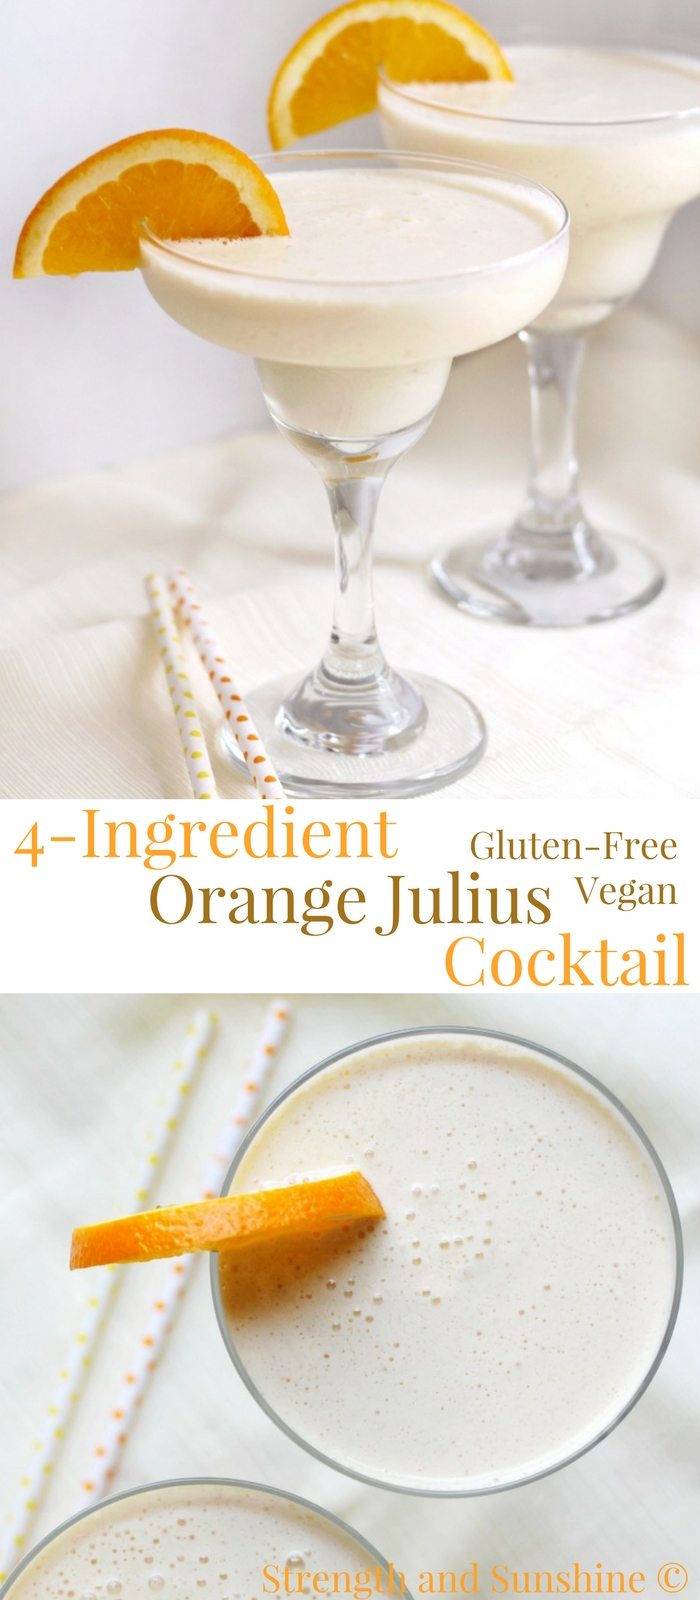 4-Ingredient Orange Julius Cocktail (Gluten-Free, Vegan) | Strength and Sunshine @RebeccaGF666 Give your Orange Julius a grown-up boozy twist! A quick and easy 4-Ingredient Orange Julius Cocktail recipe that's gluten-free, vegan, and makes for a perfect frozen, creamy, and fruit treat! A sippable Creamsicle for adults only! #orangejulius #creamsicle #cocktail #glutenfree #vegan ad